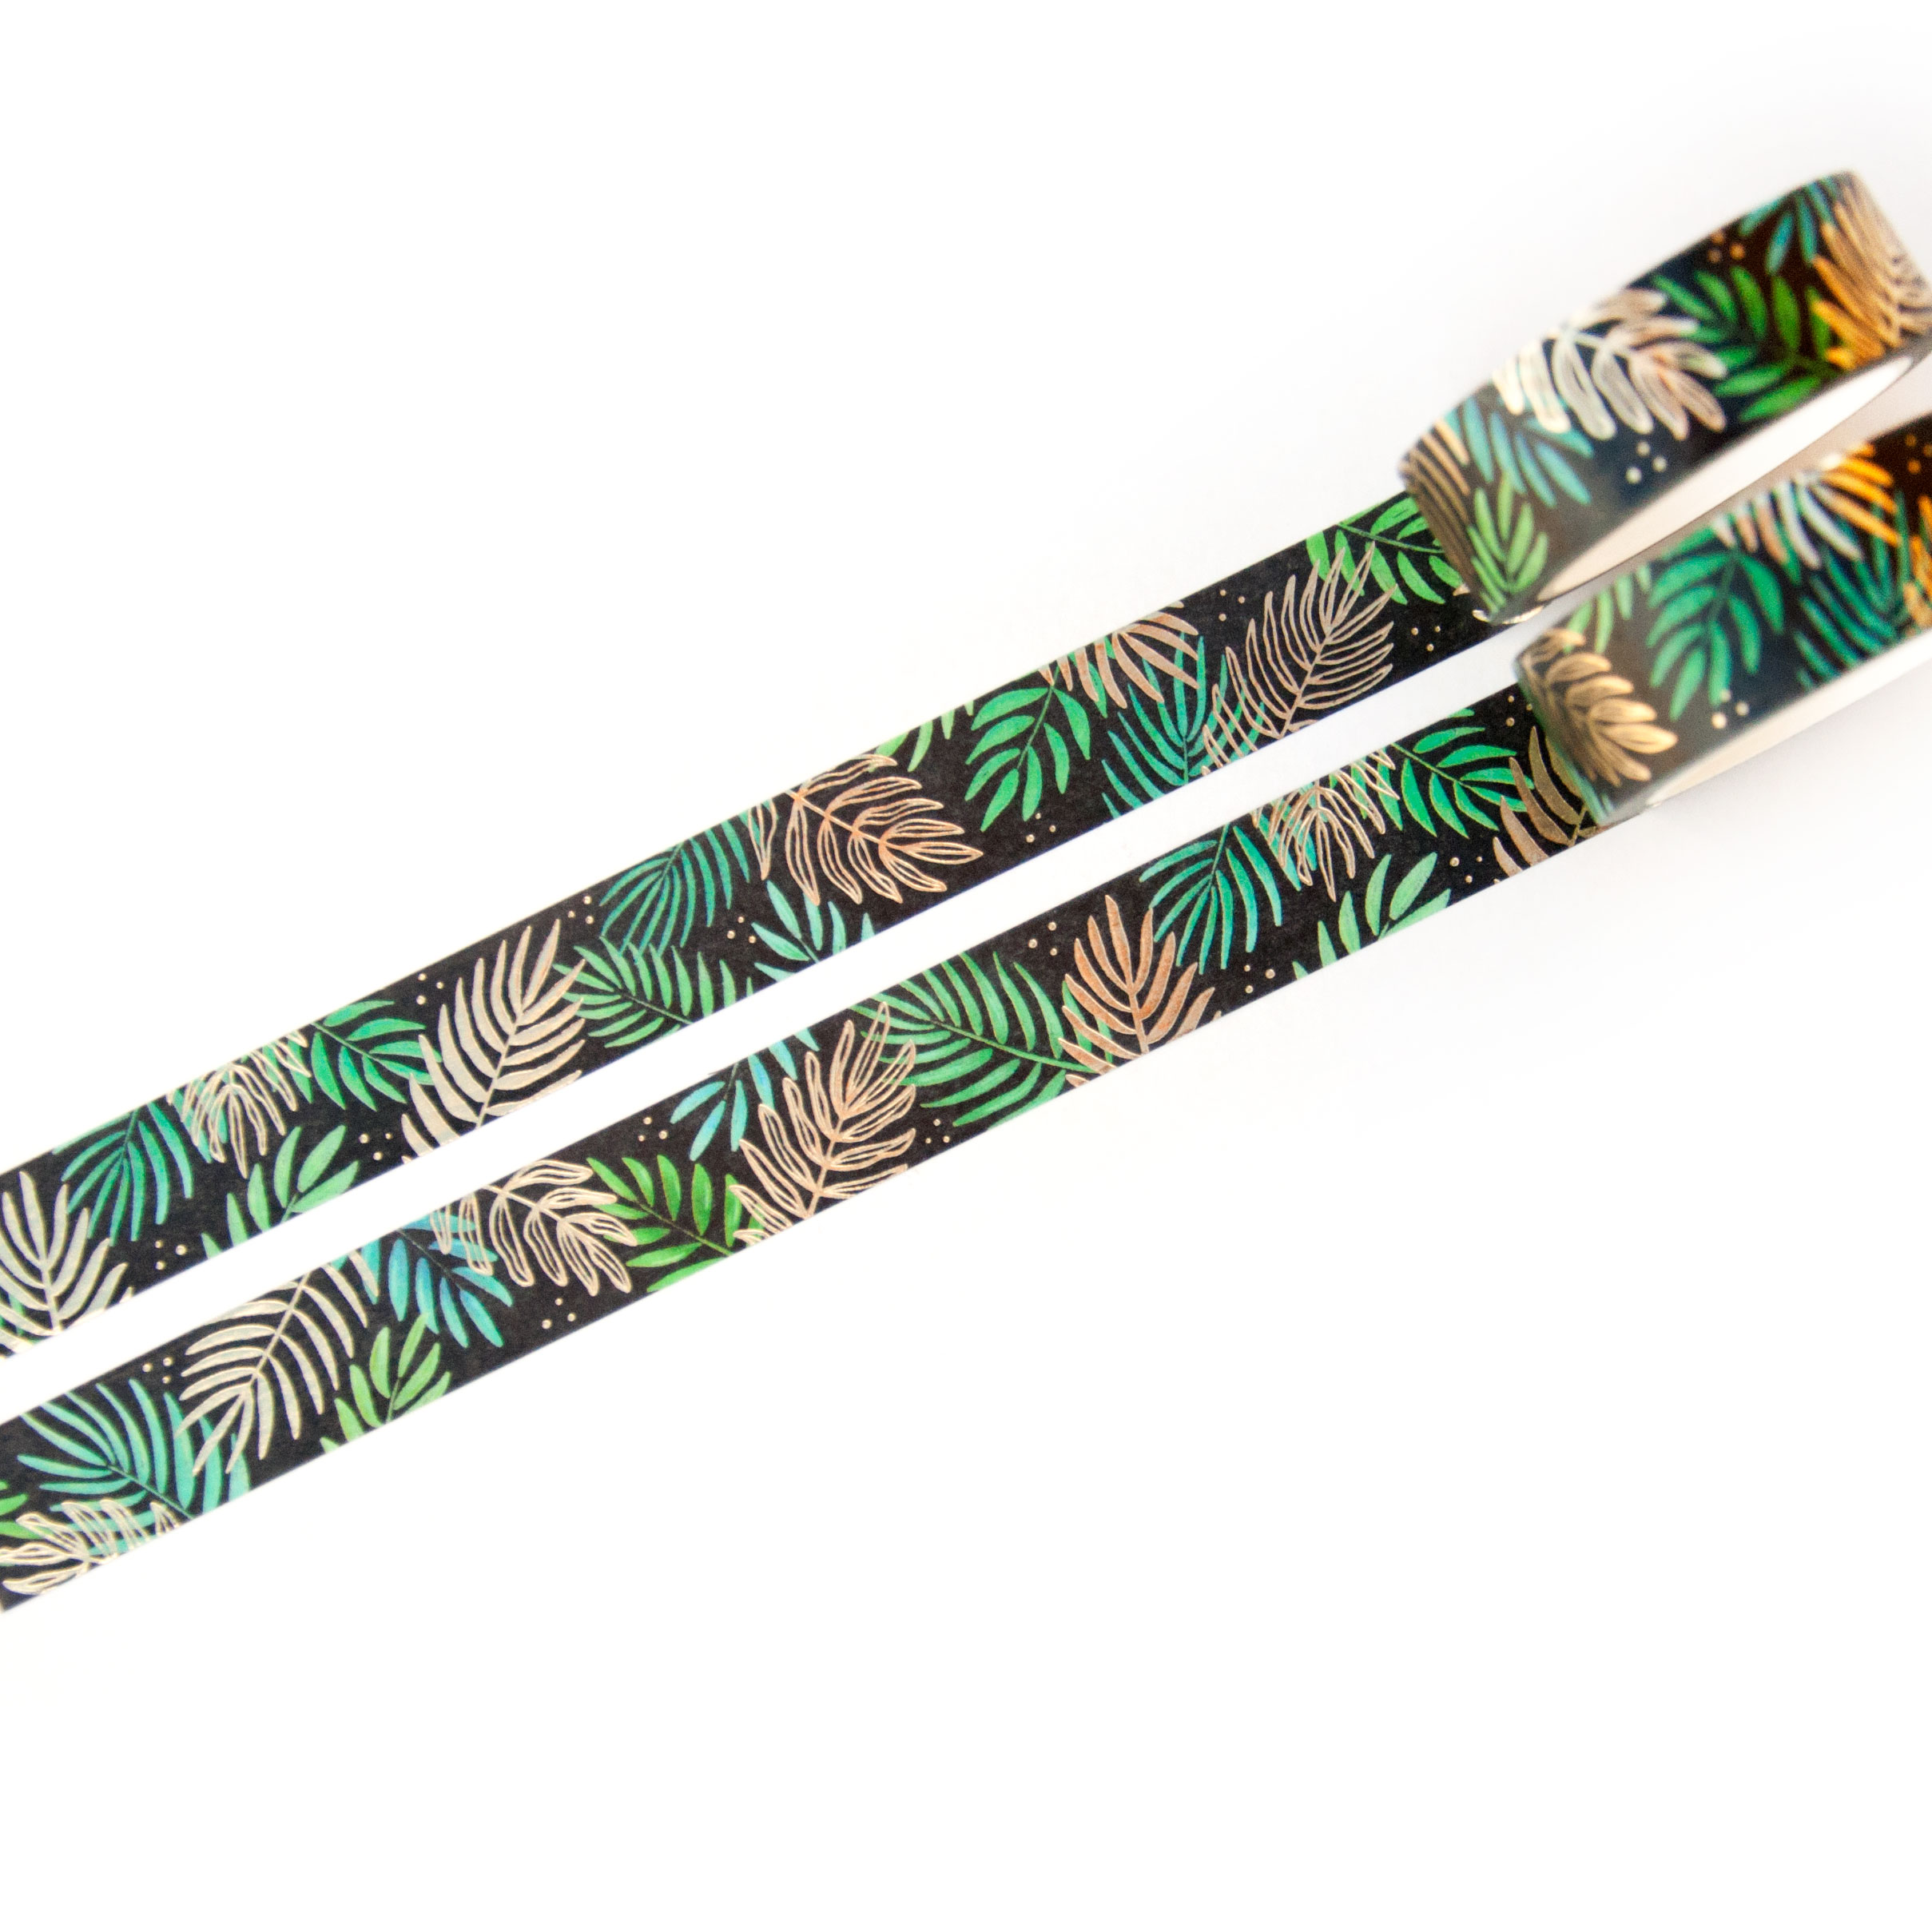 Golden Palm Leaves Washi Tape - Design by Willwa